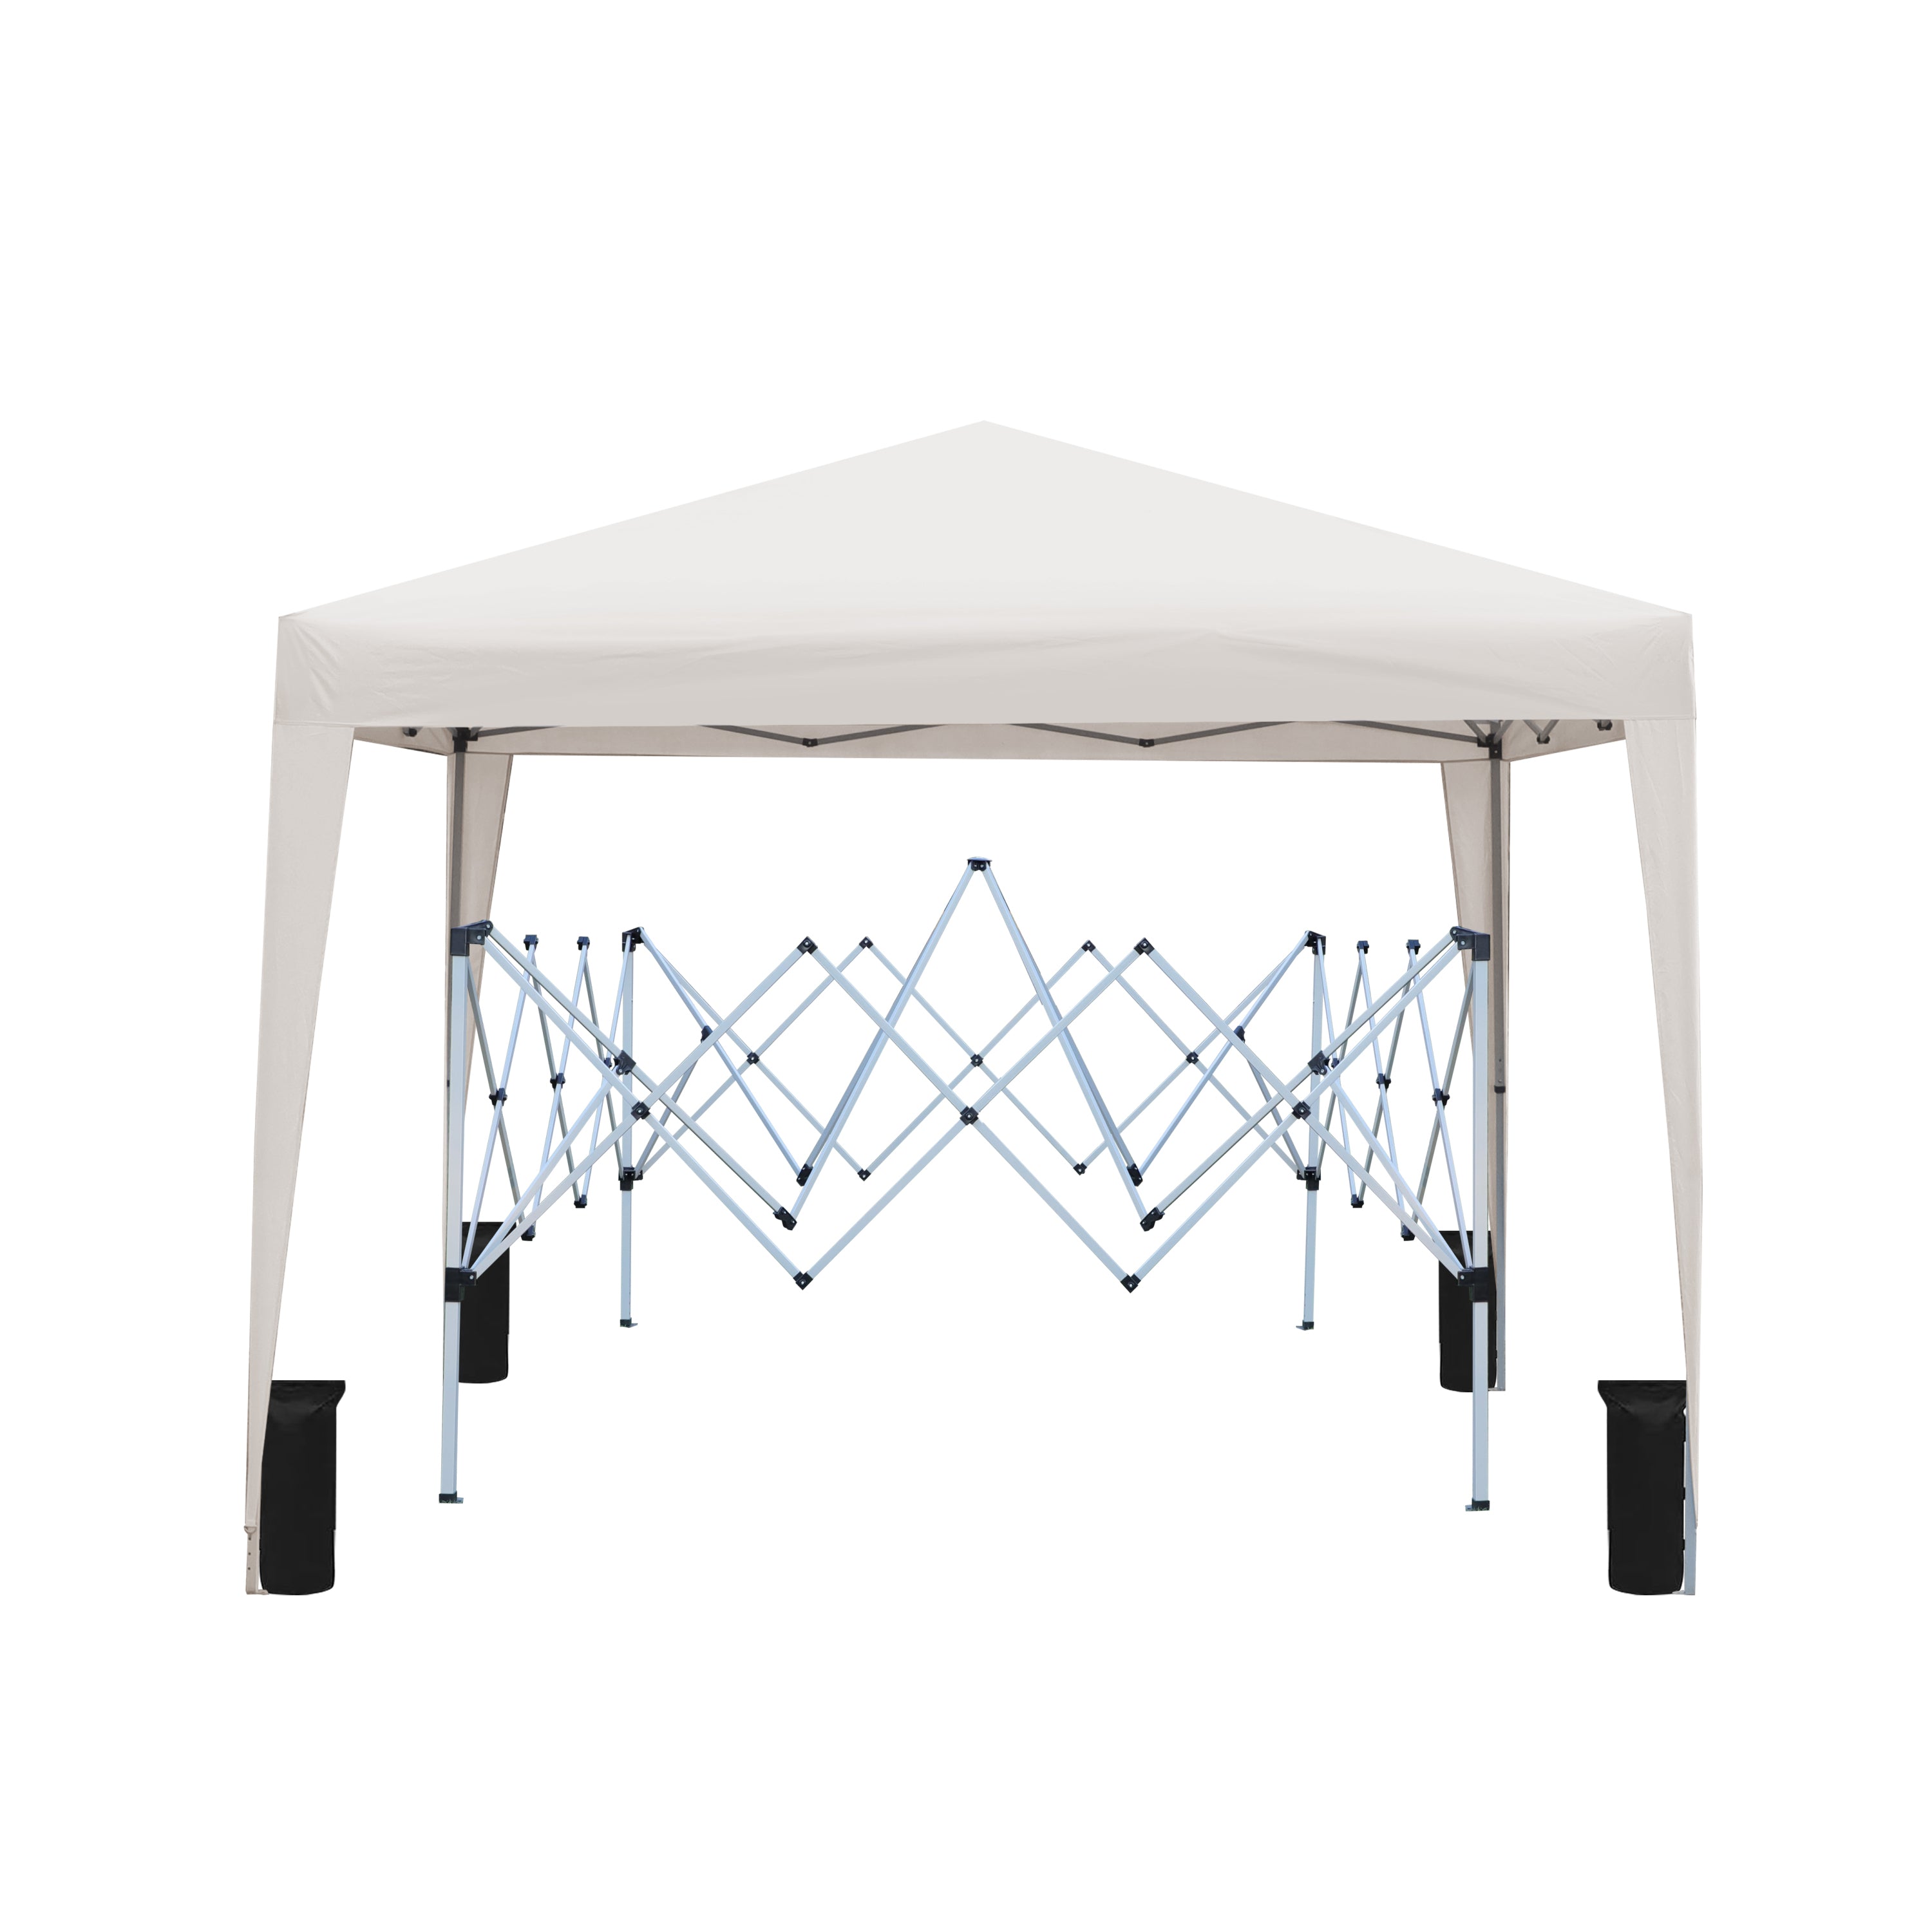 🆓🚛 Outdoor 10x 10Ft Pop Up Gazebo Canopy Tent with 4pcs Weight sand bag & Carry Bag, Beige